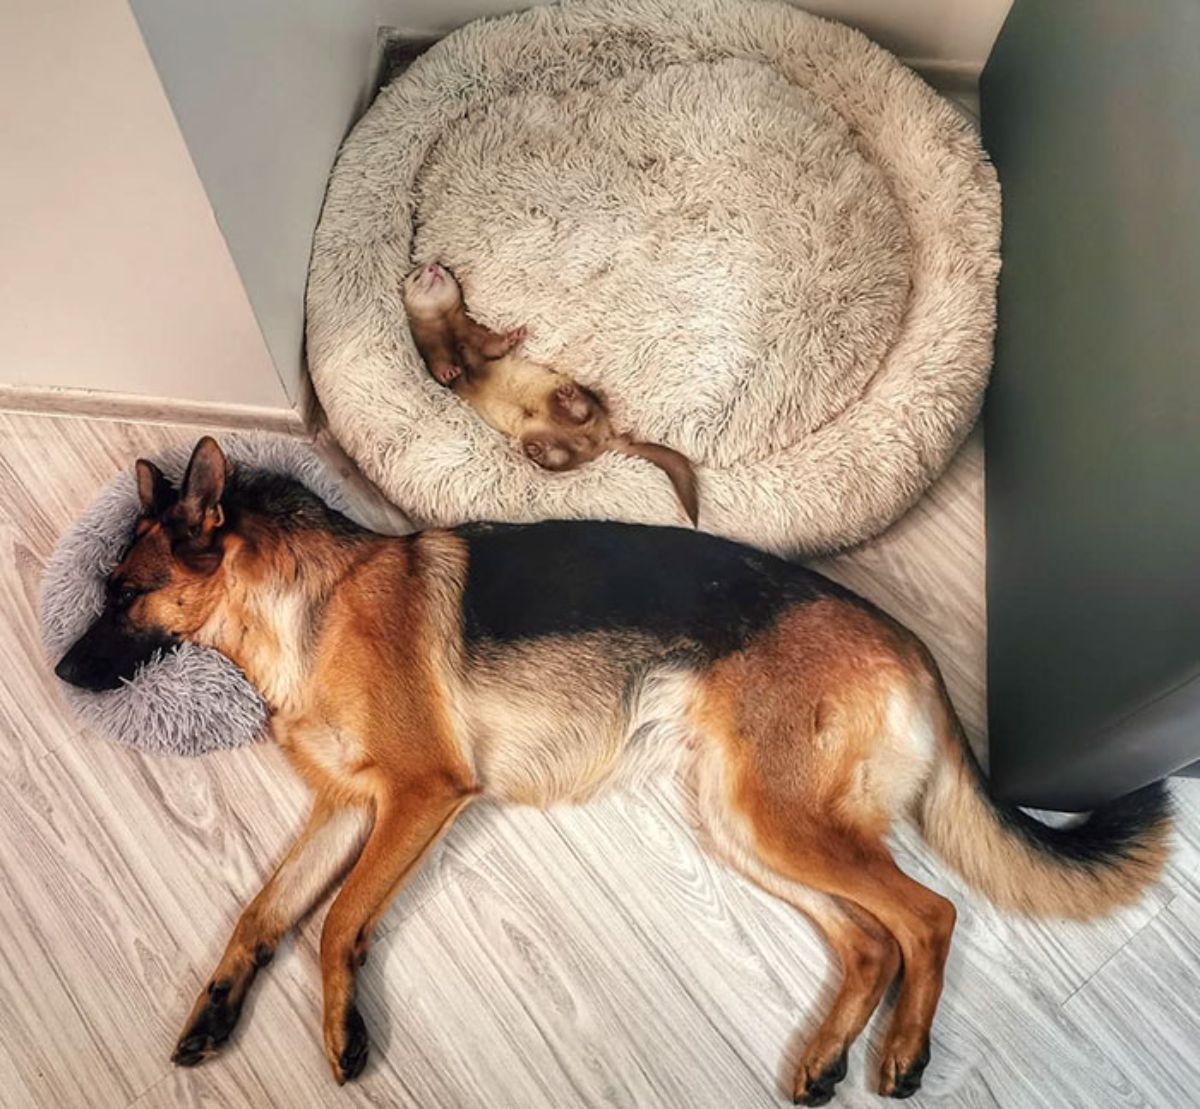 german shepherd sleeping on floor with head on grey cat bed and brown and white ferret sleeping on large white dog bed